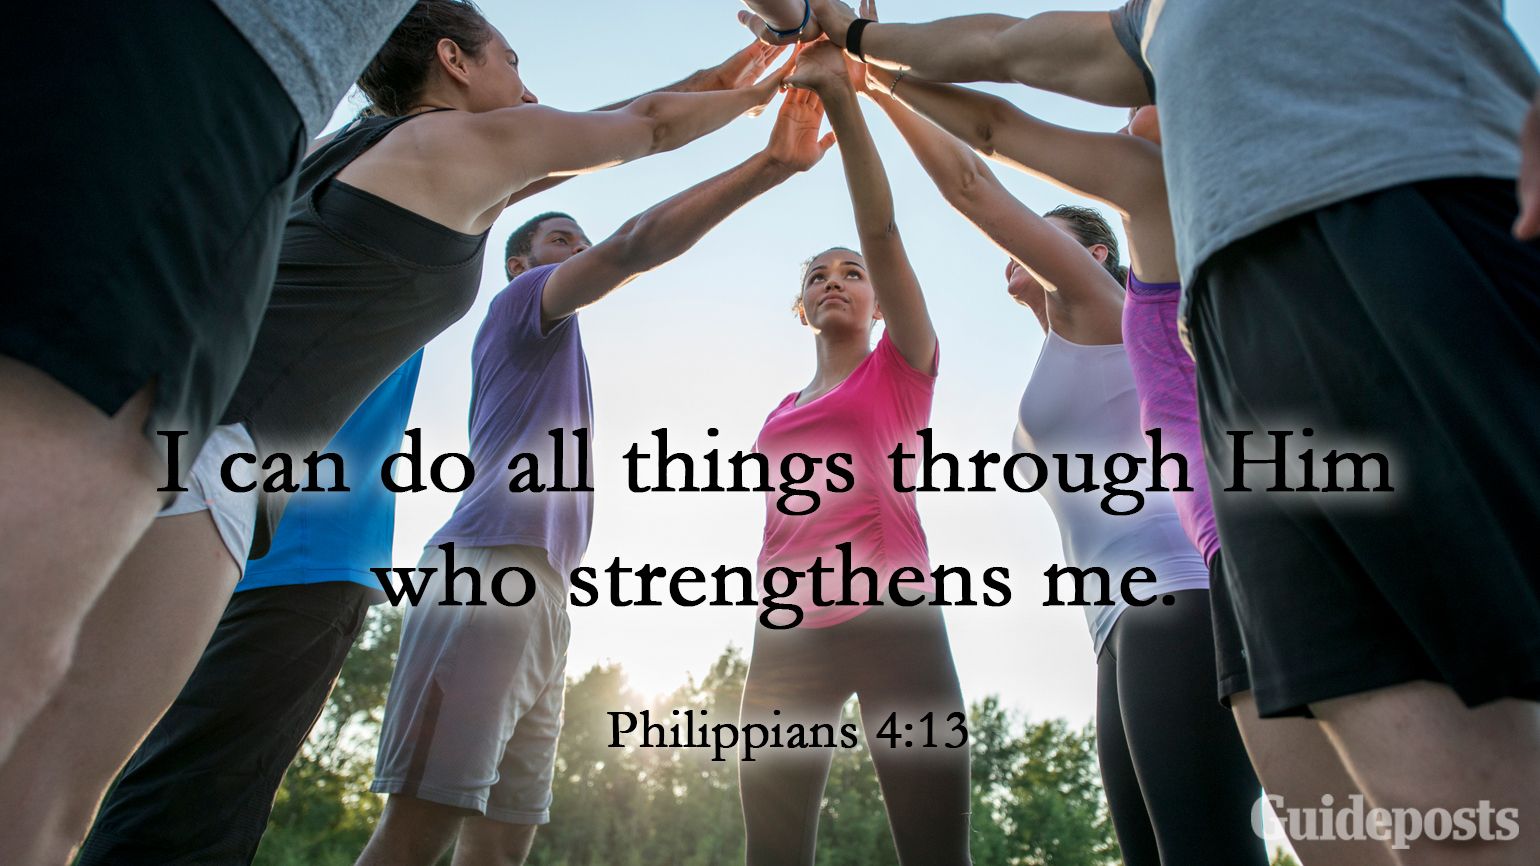 I can do all things through Him who strengthens me. Philippians 4:13